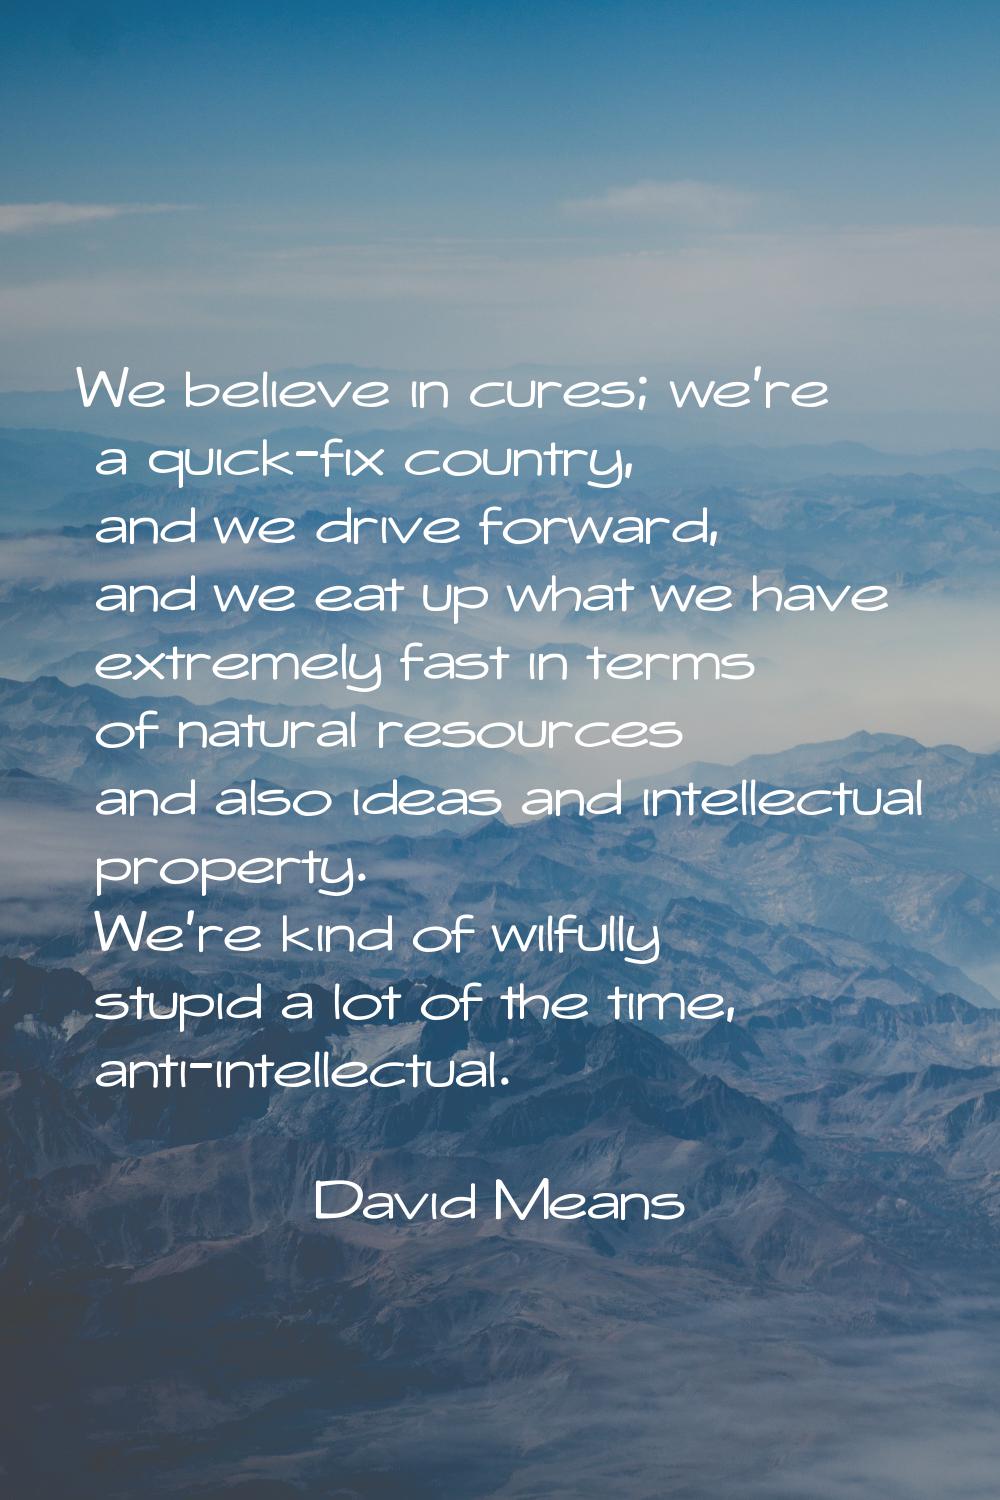 We believe in cures; we're a quick-fix country, and we drive forward, and we eat up what we have ex